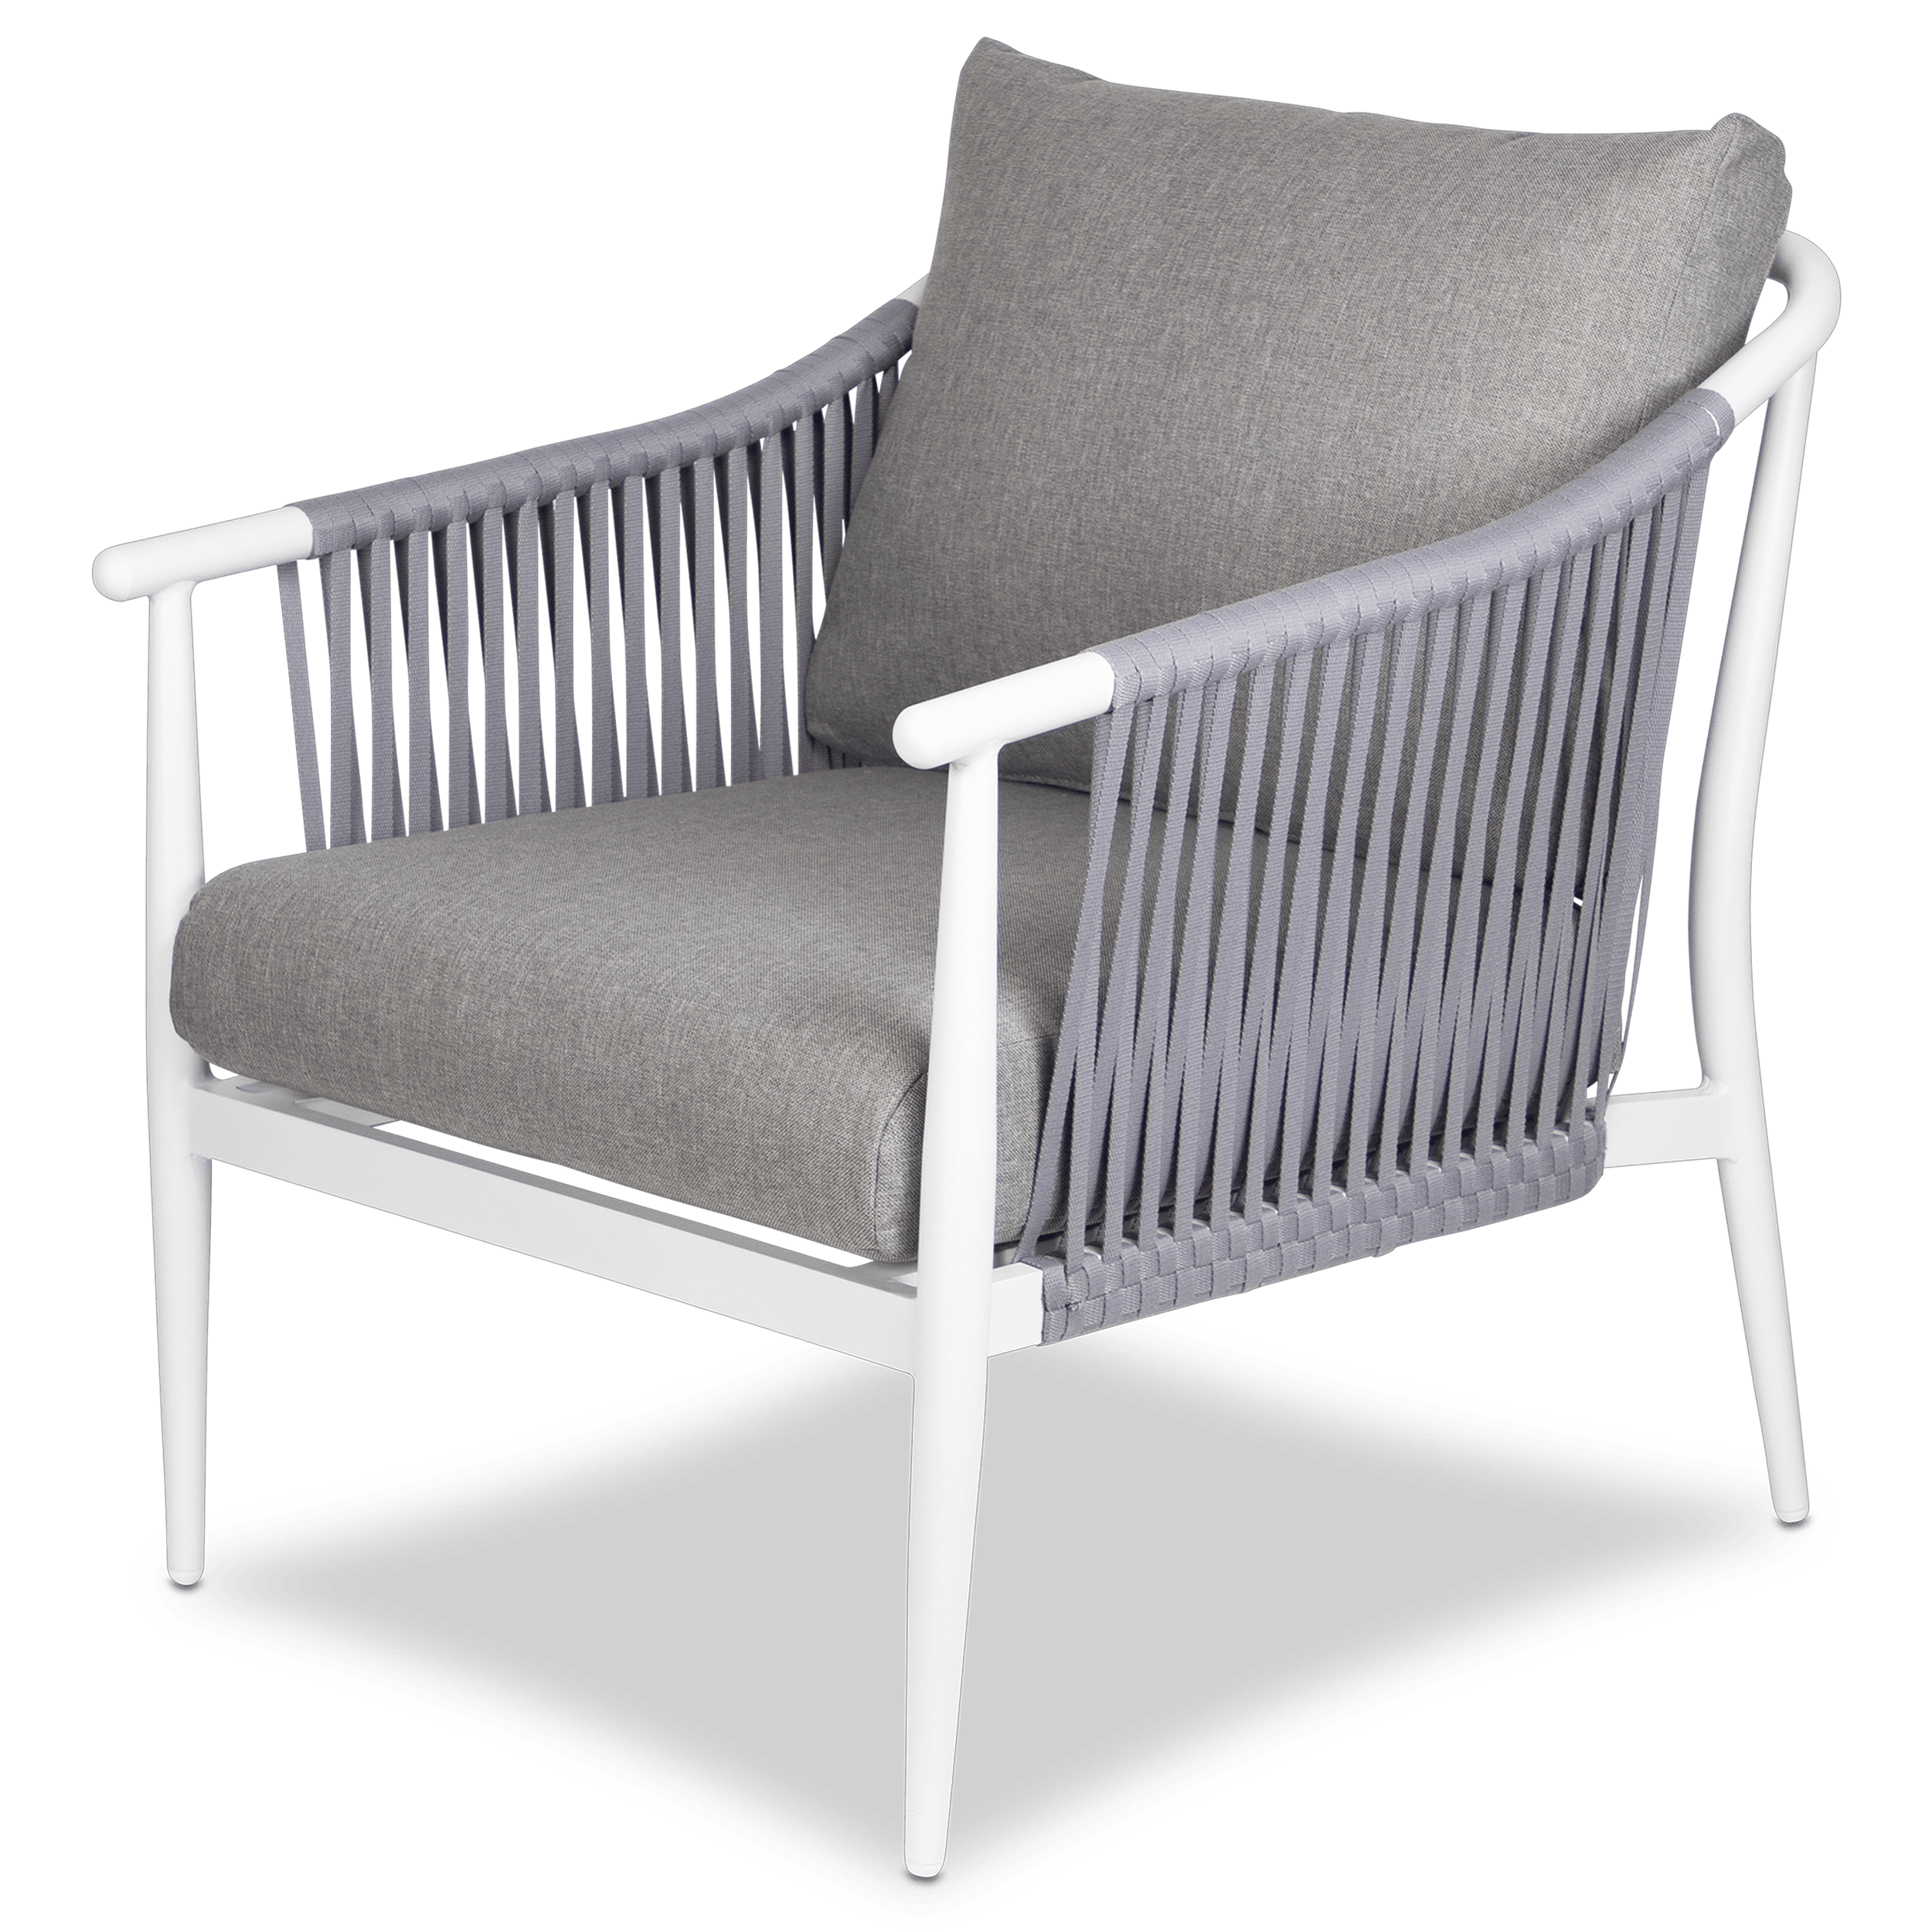 Marbella Outdoor Armchair in Arctic White with Sahara Olefin Cushions and Pewter Rope